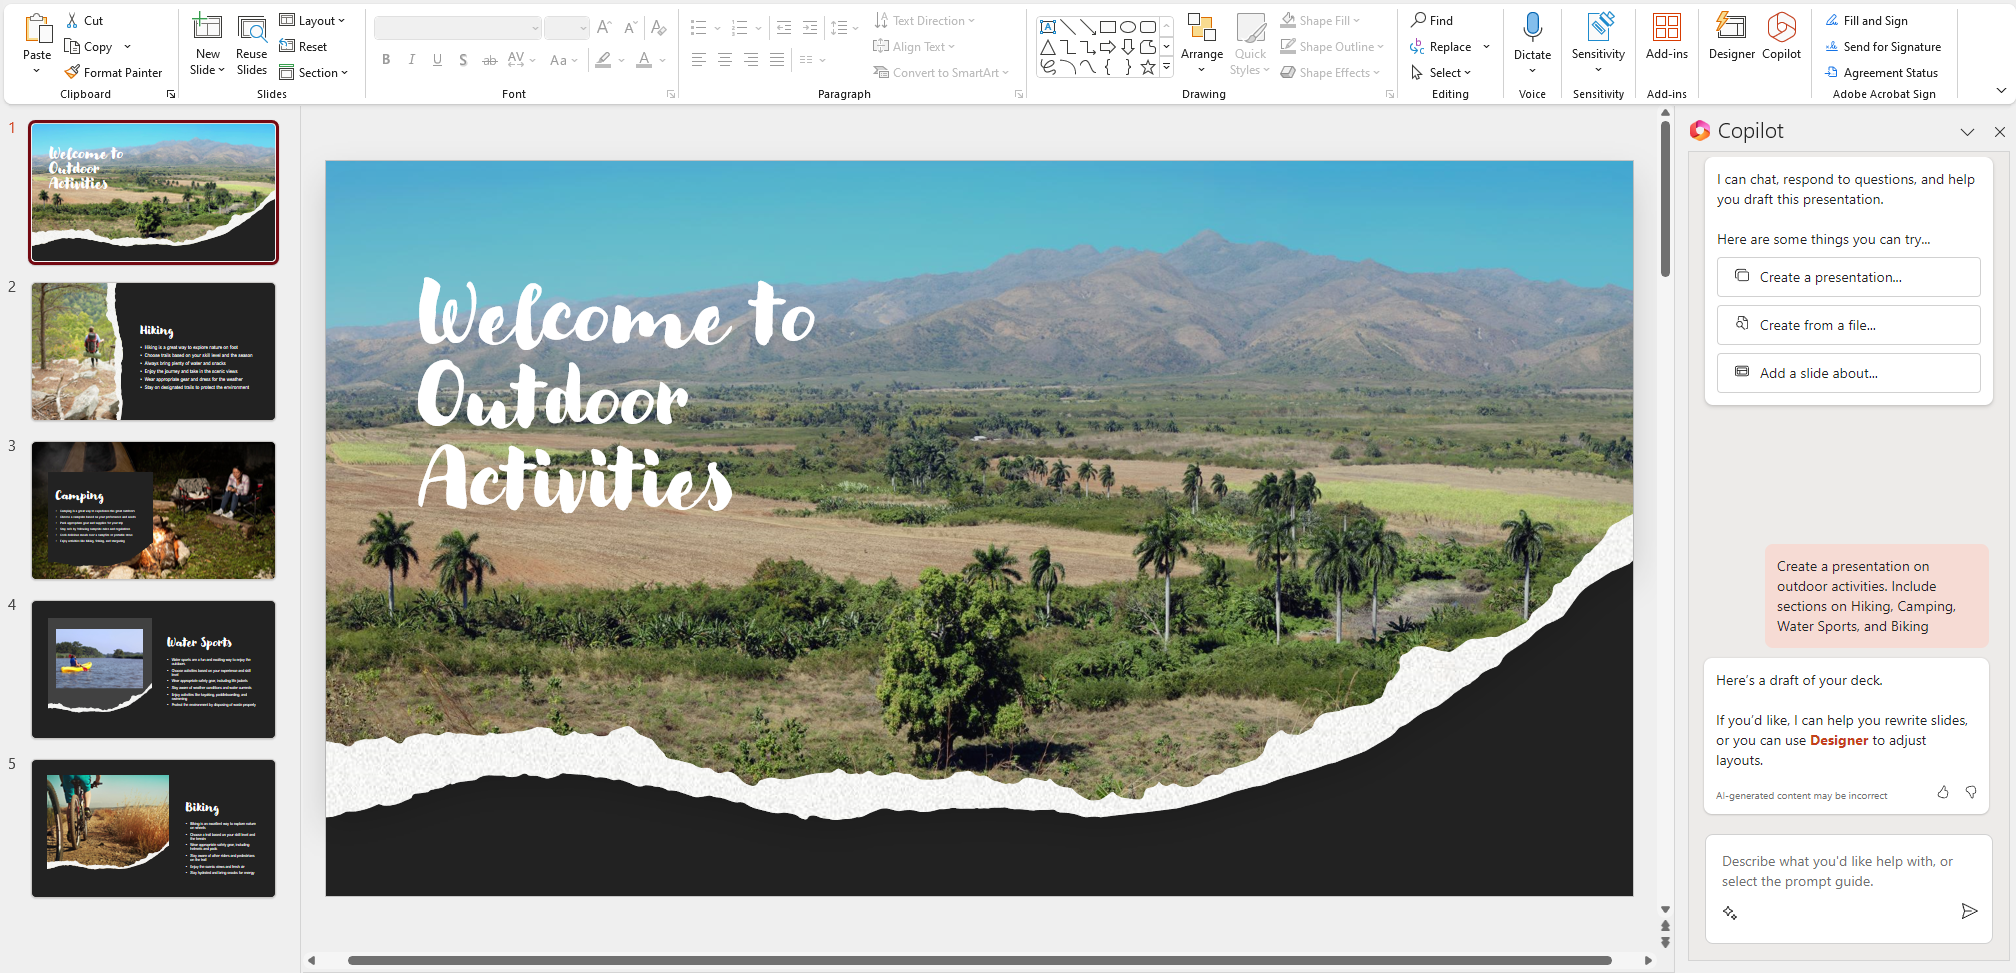 Screenshot of new PowerPoint presentation created by Microsoft 365 Copilot.